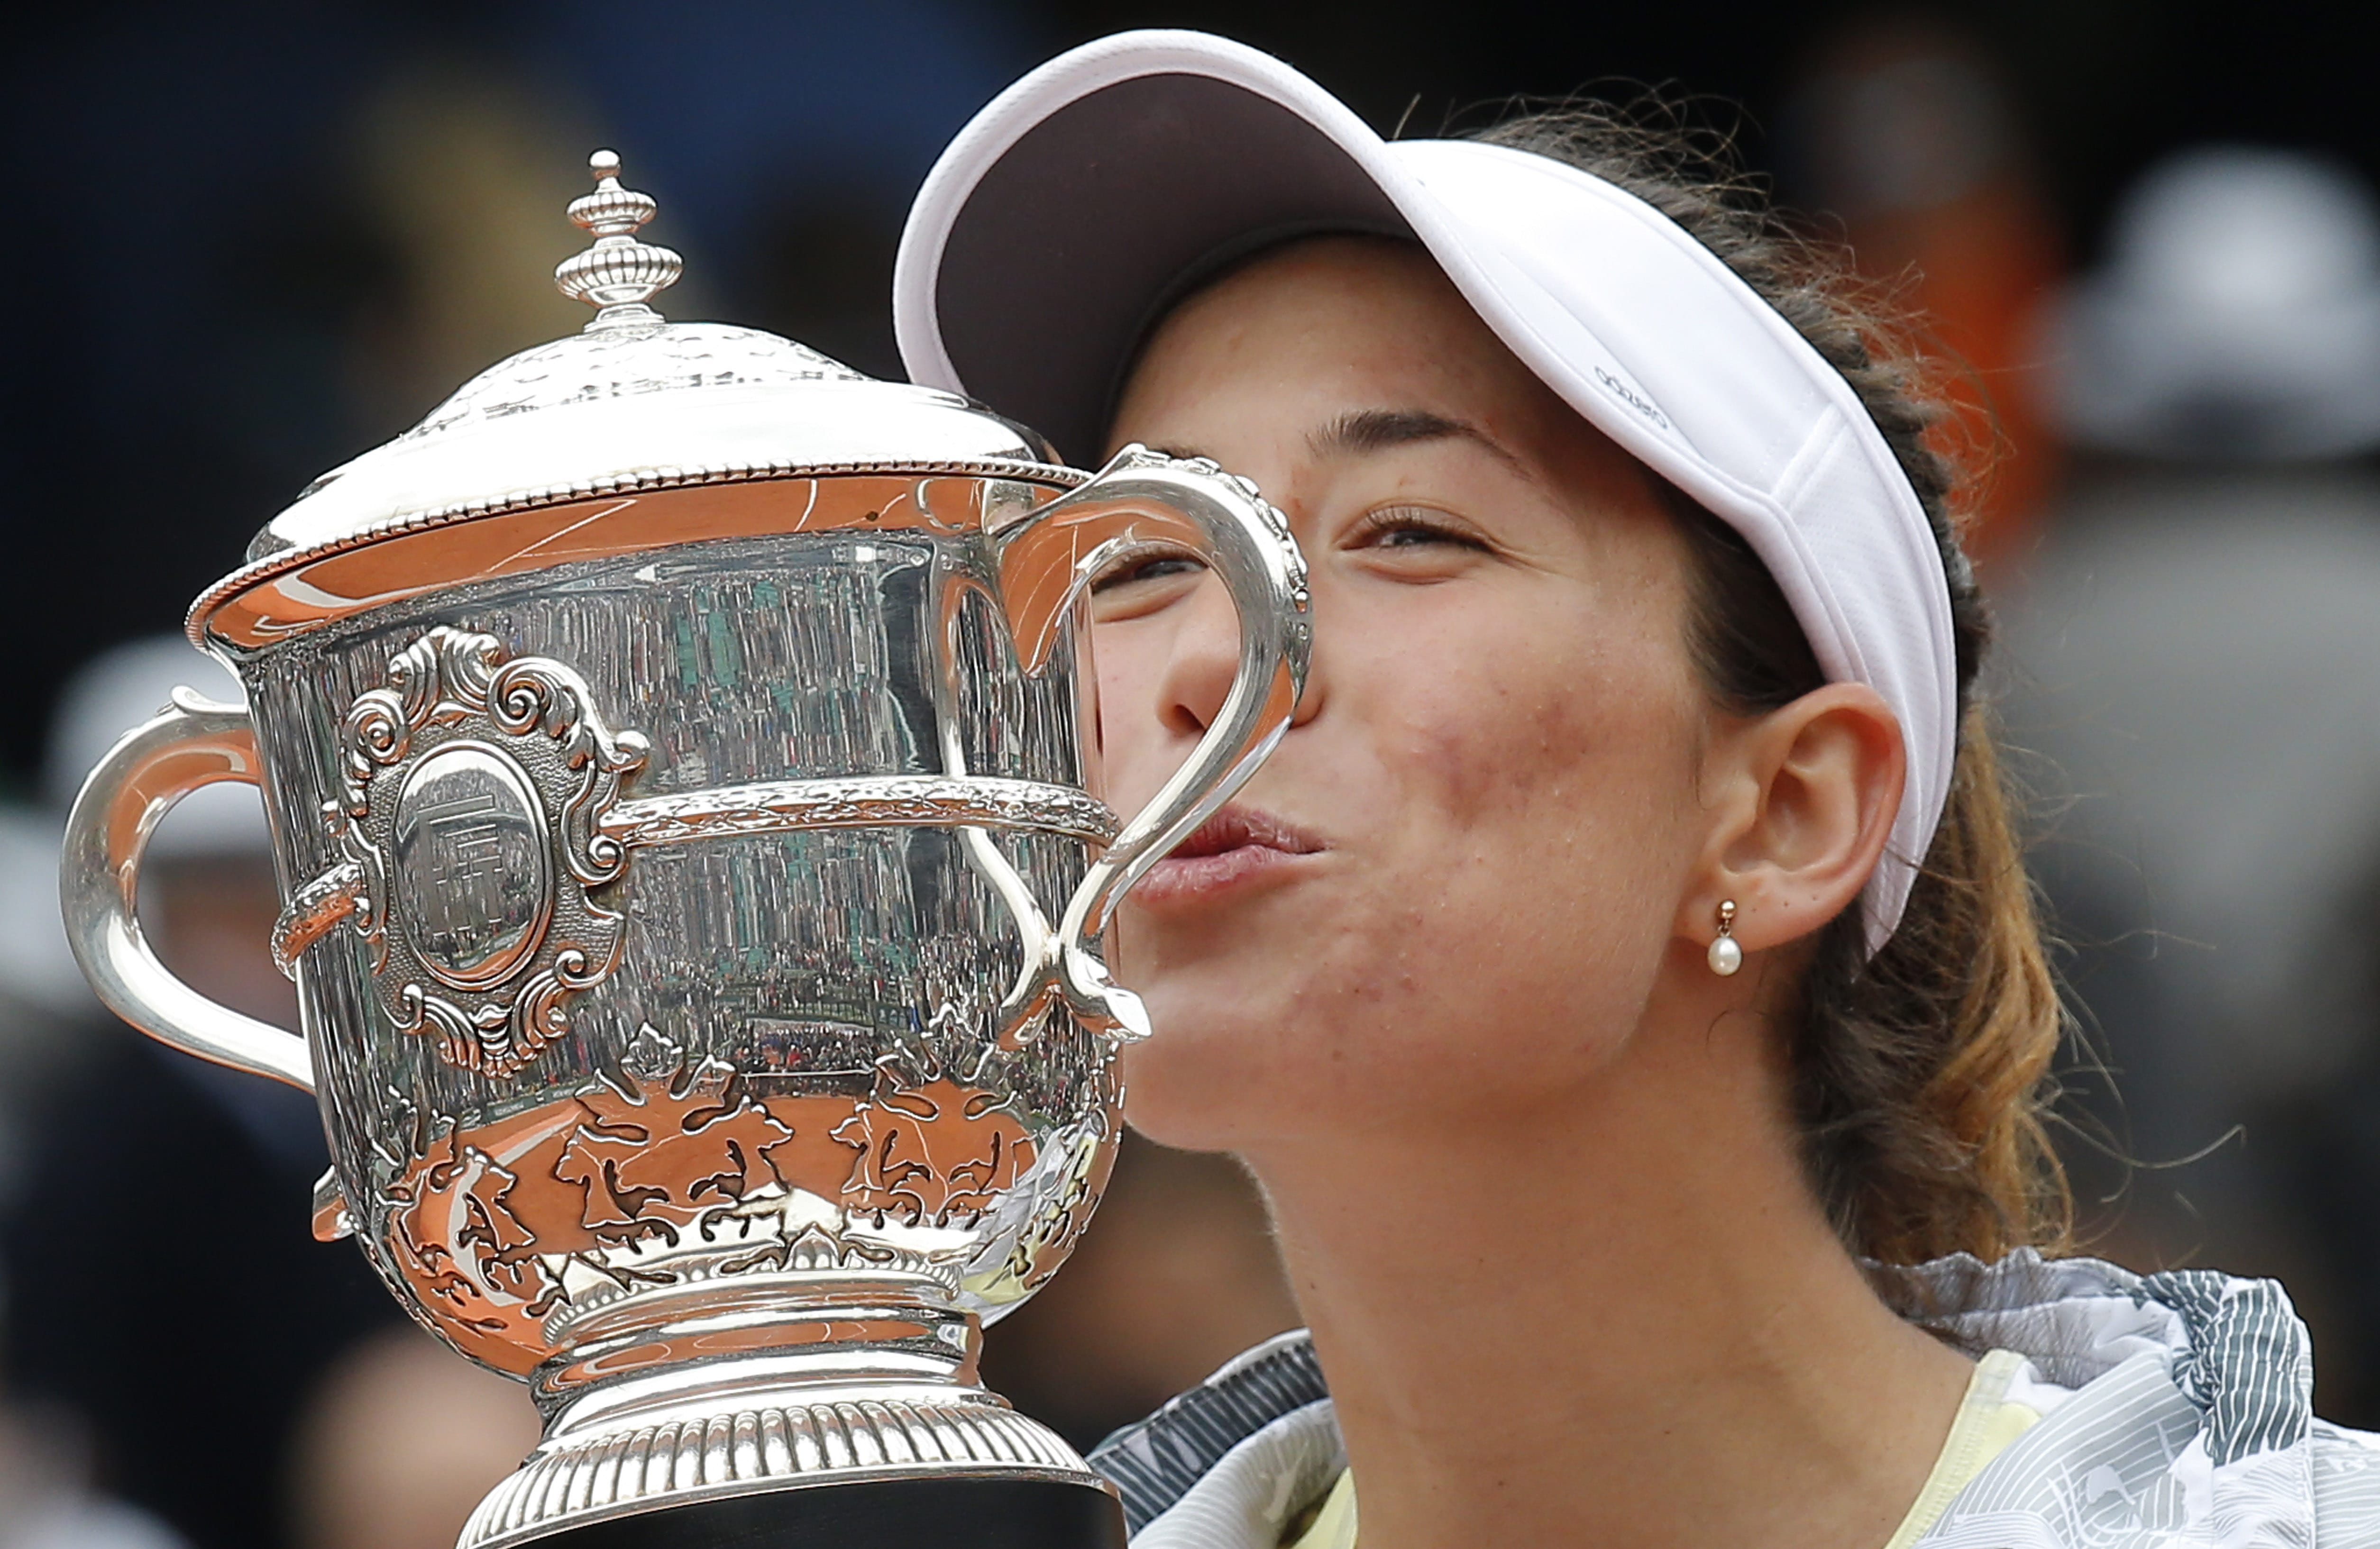 Spain's Garbine Muguruza is to kiss the cup after defeating Serena Williams of the U.S.  in their final match of the French Open tennis tournament at the Roland Garros stadium, Saturday, June 4, 2016 in Paris.  Muguruza won 7-5, 6-4.